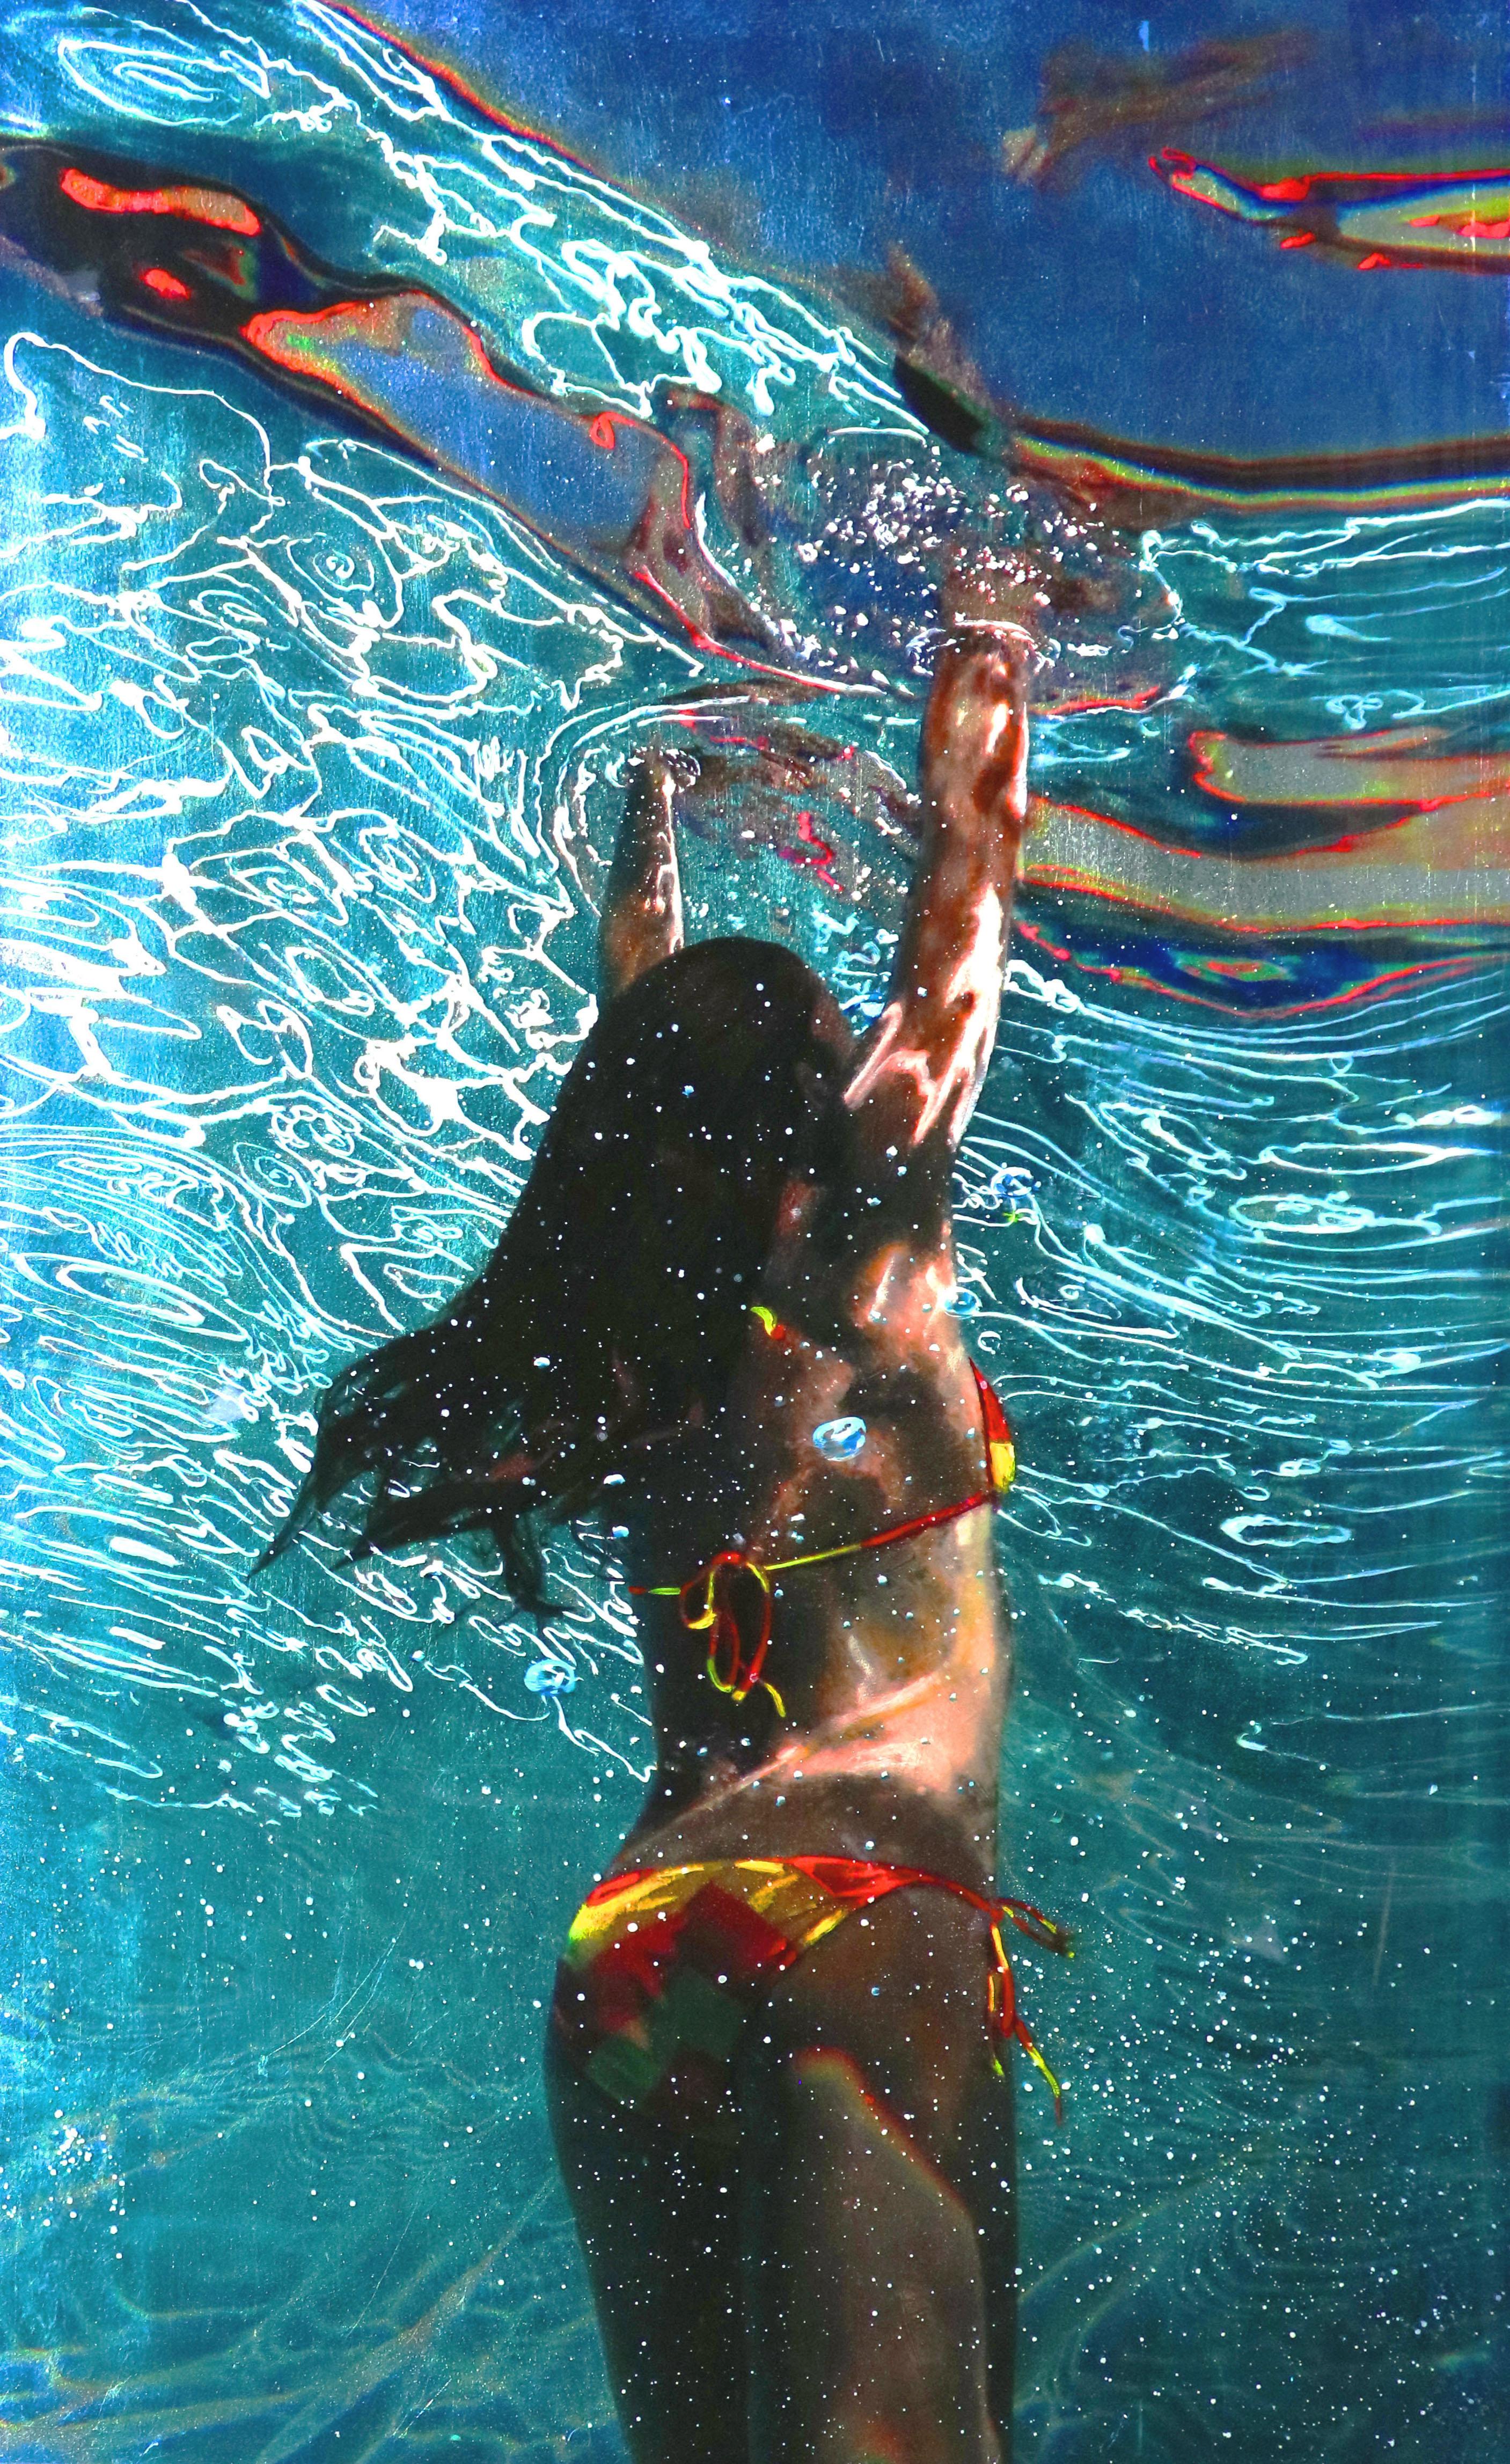 REACHING UP - Contemporary Mixed Media / Figurative Realism / Swimmer Underwater - Mixed Media Art by Eric Zener